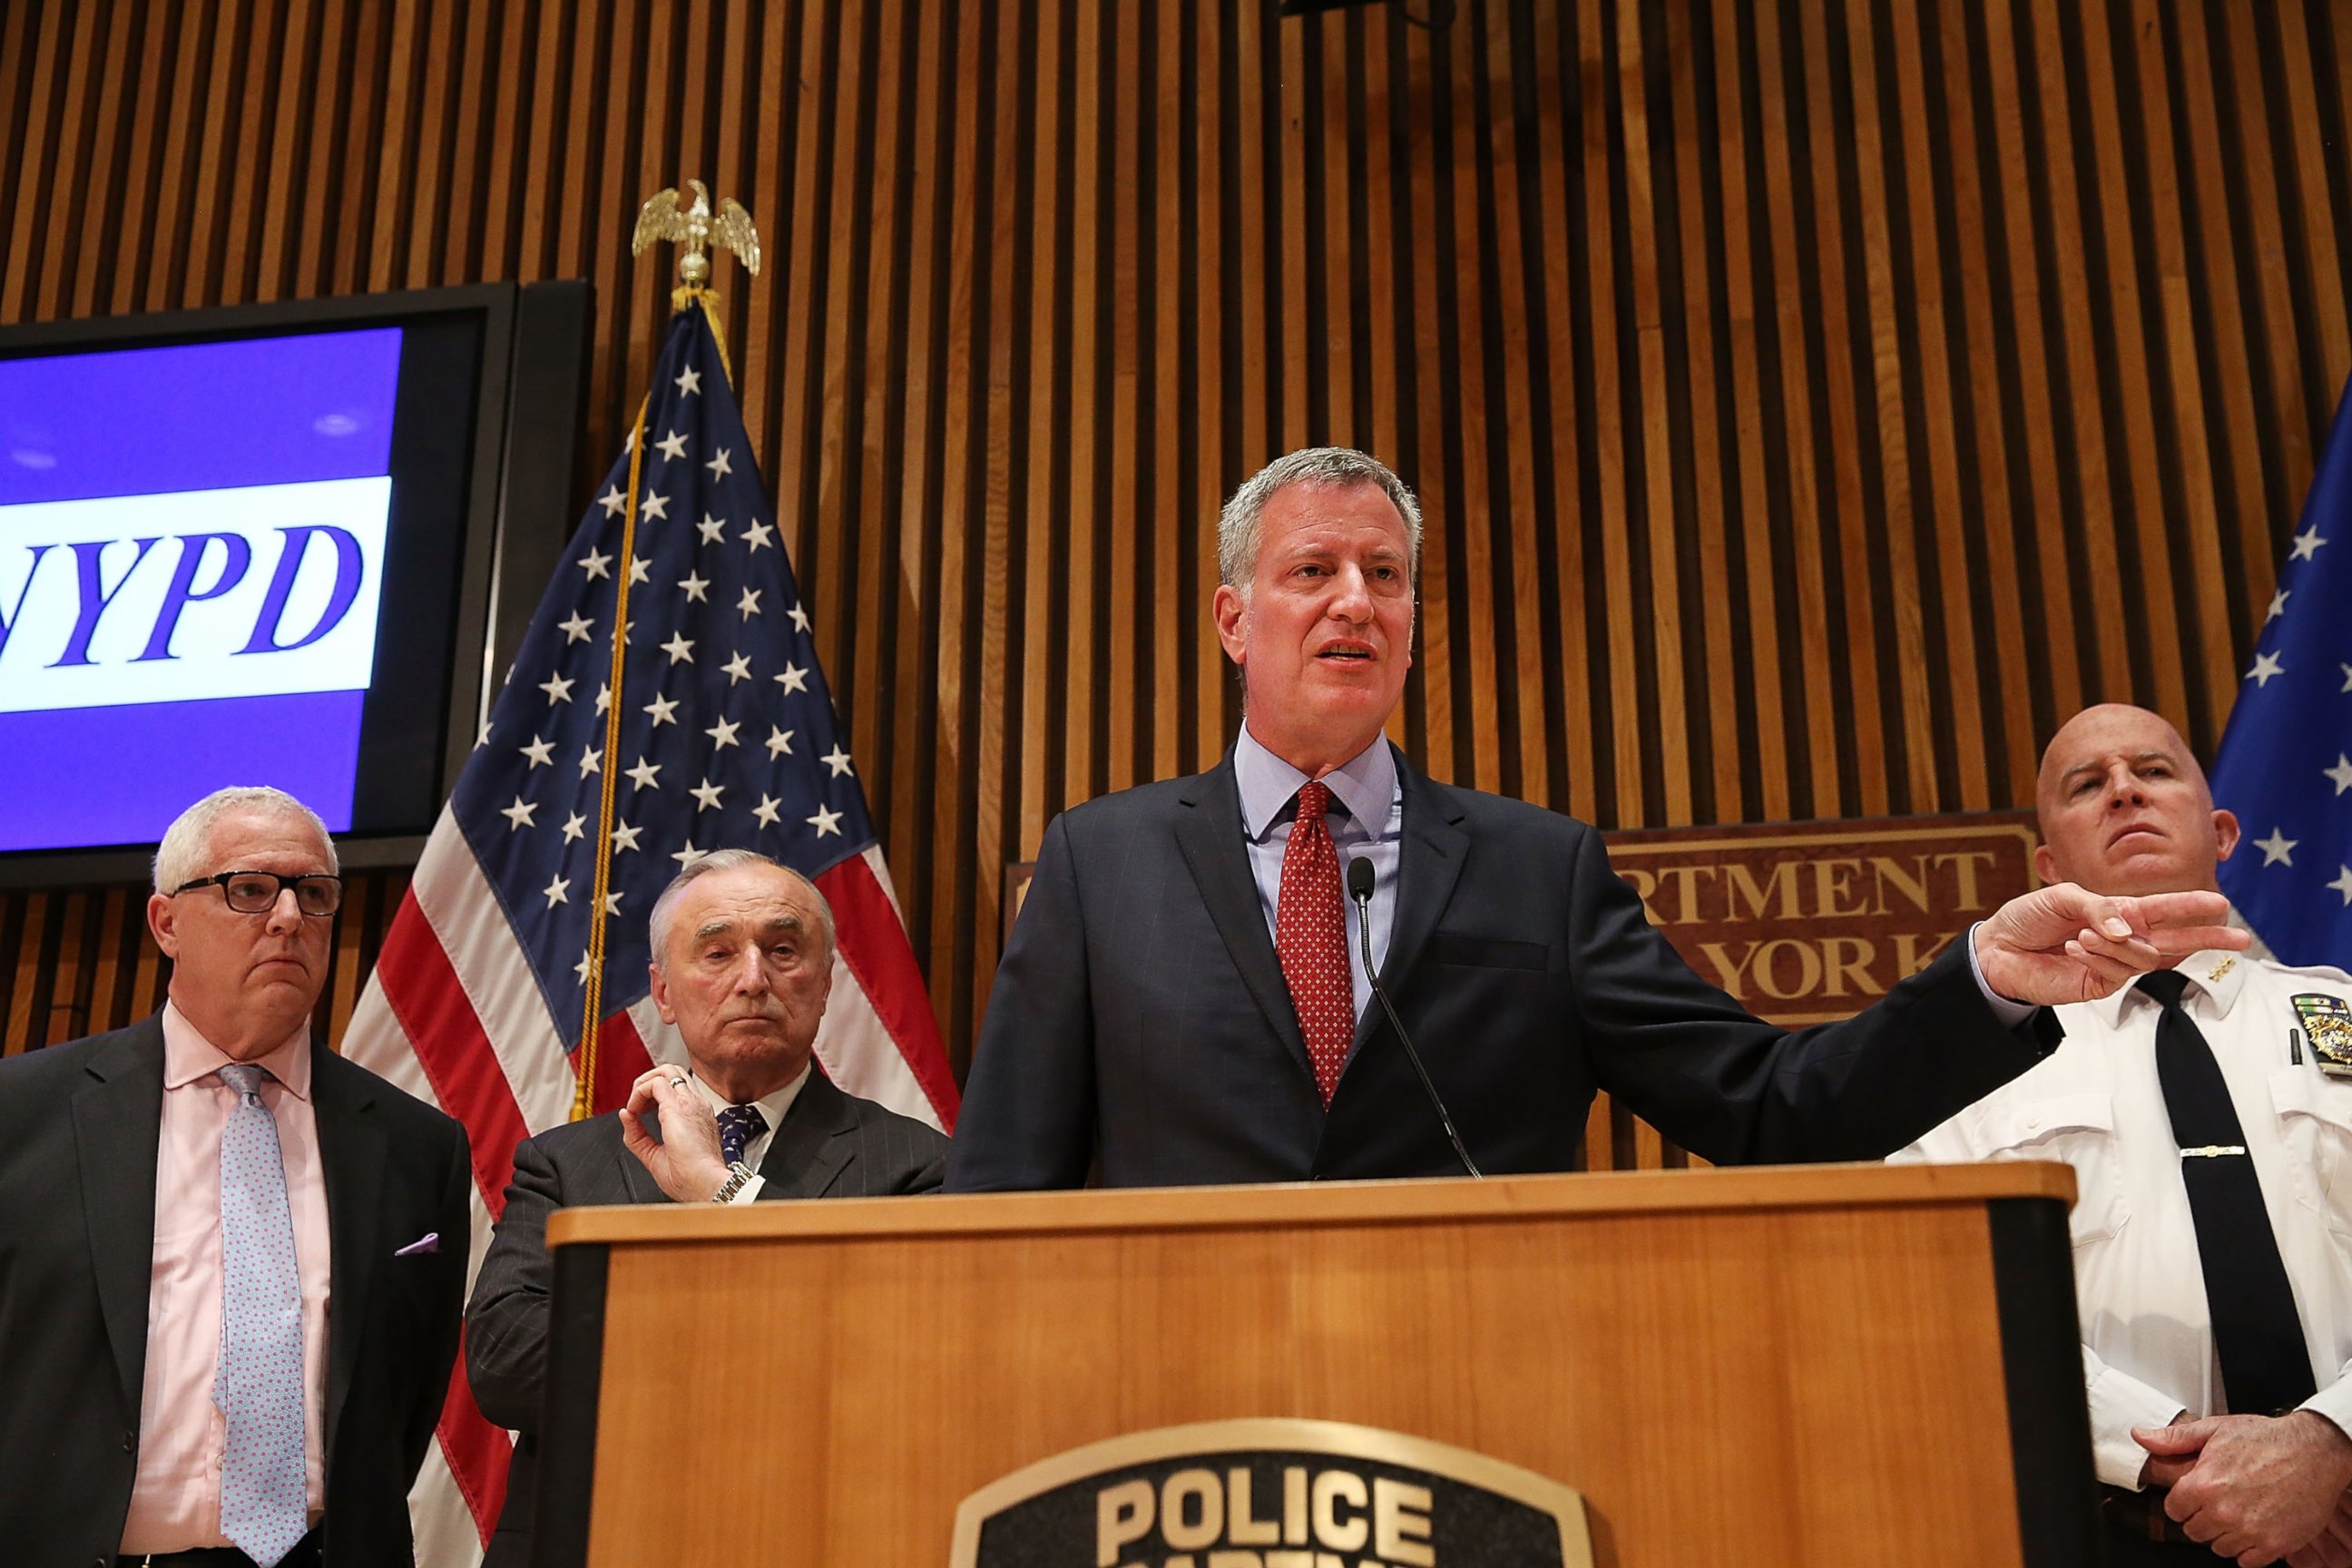 PHOTO: New York City Mayor Bill de Blasio is joined by Police Commissioner William Bratton at a news conference where the two spoke about a "table-top" emergecny drill following attacks in the Belgium capital of Brussels, March 28, 2016, in New York.